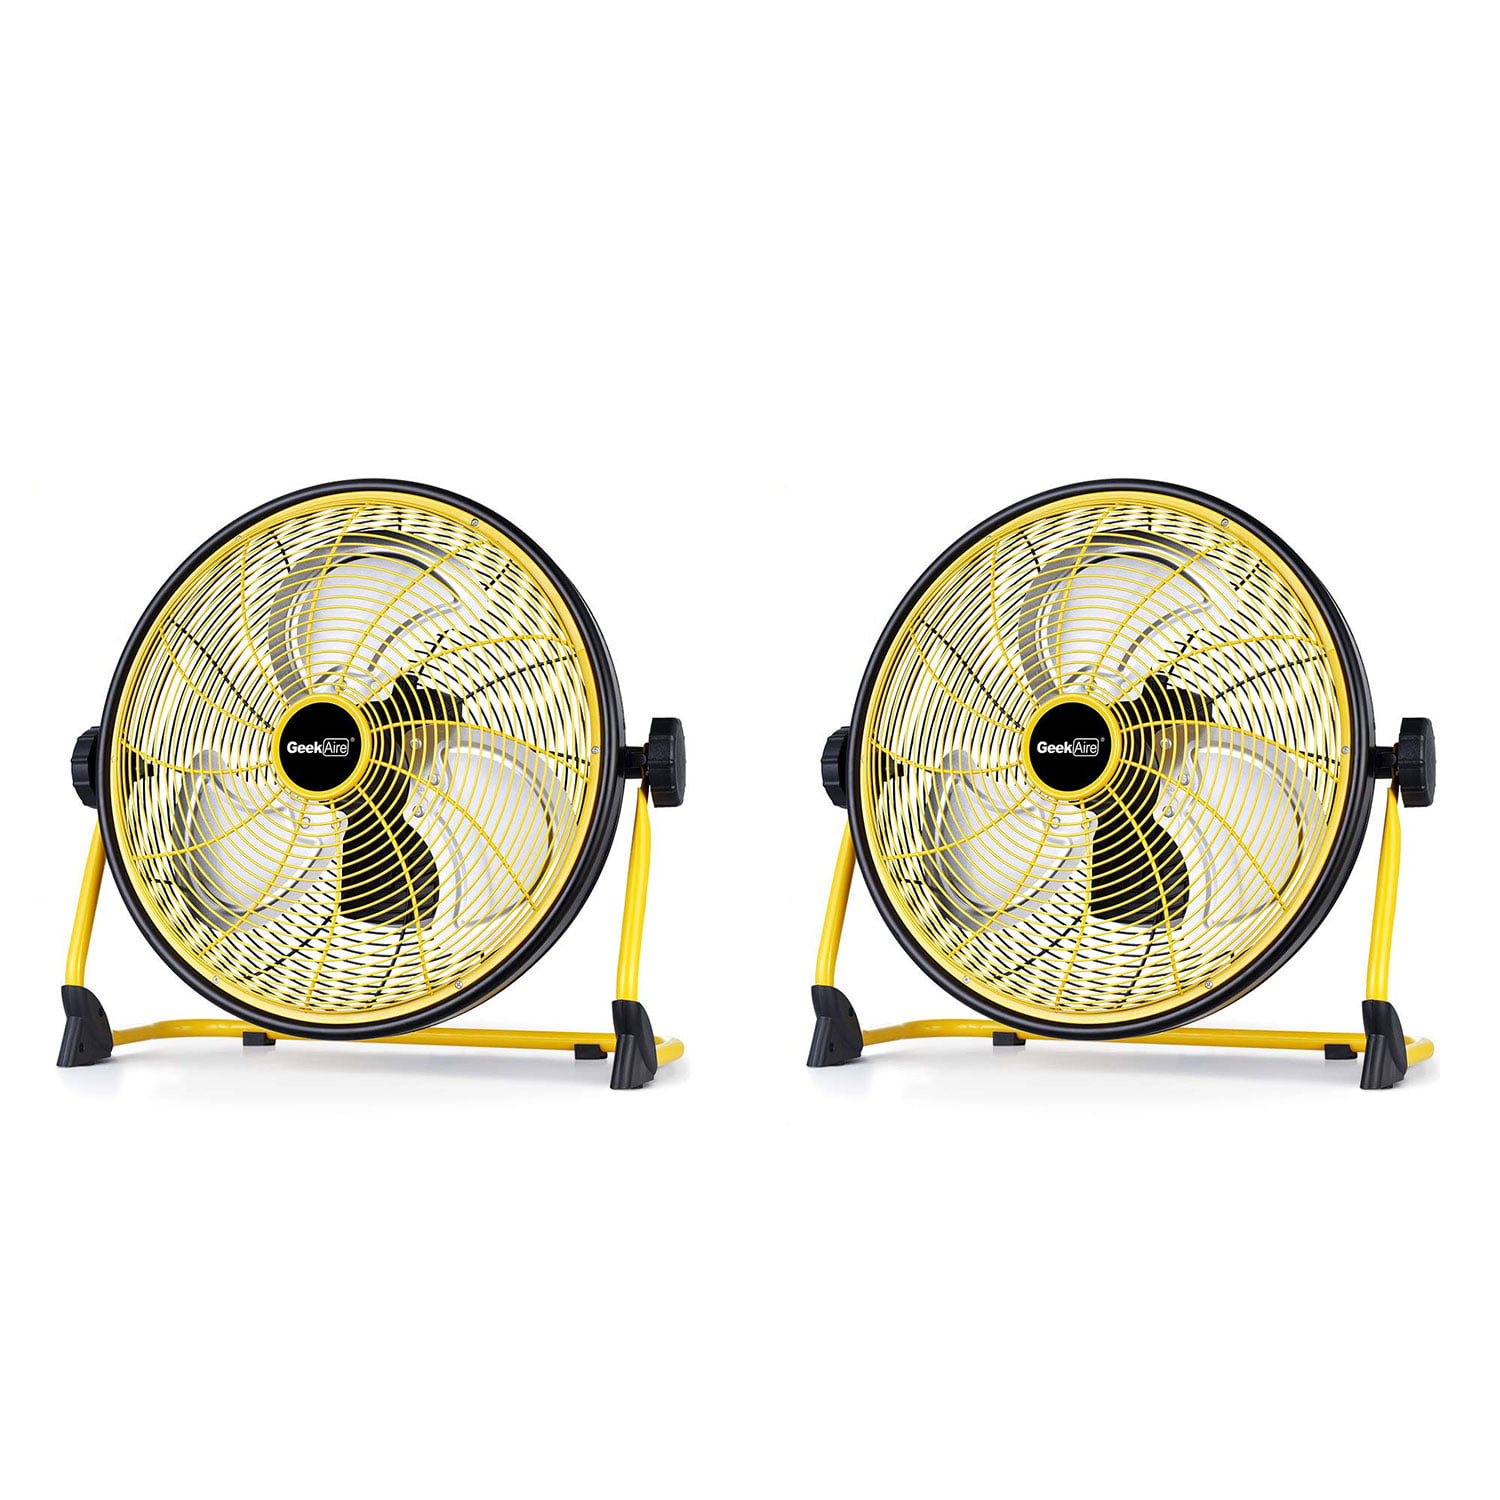 Geek Aire Portable Velocity Floor Fan Rechargeable Battery Operated Industrial for sale online 